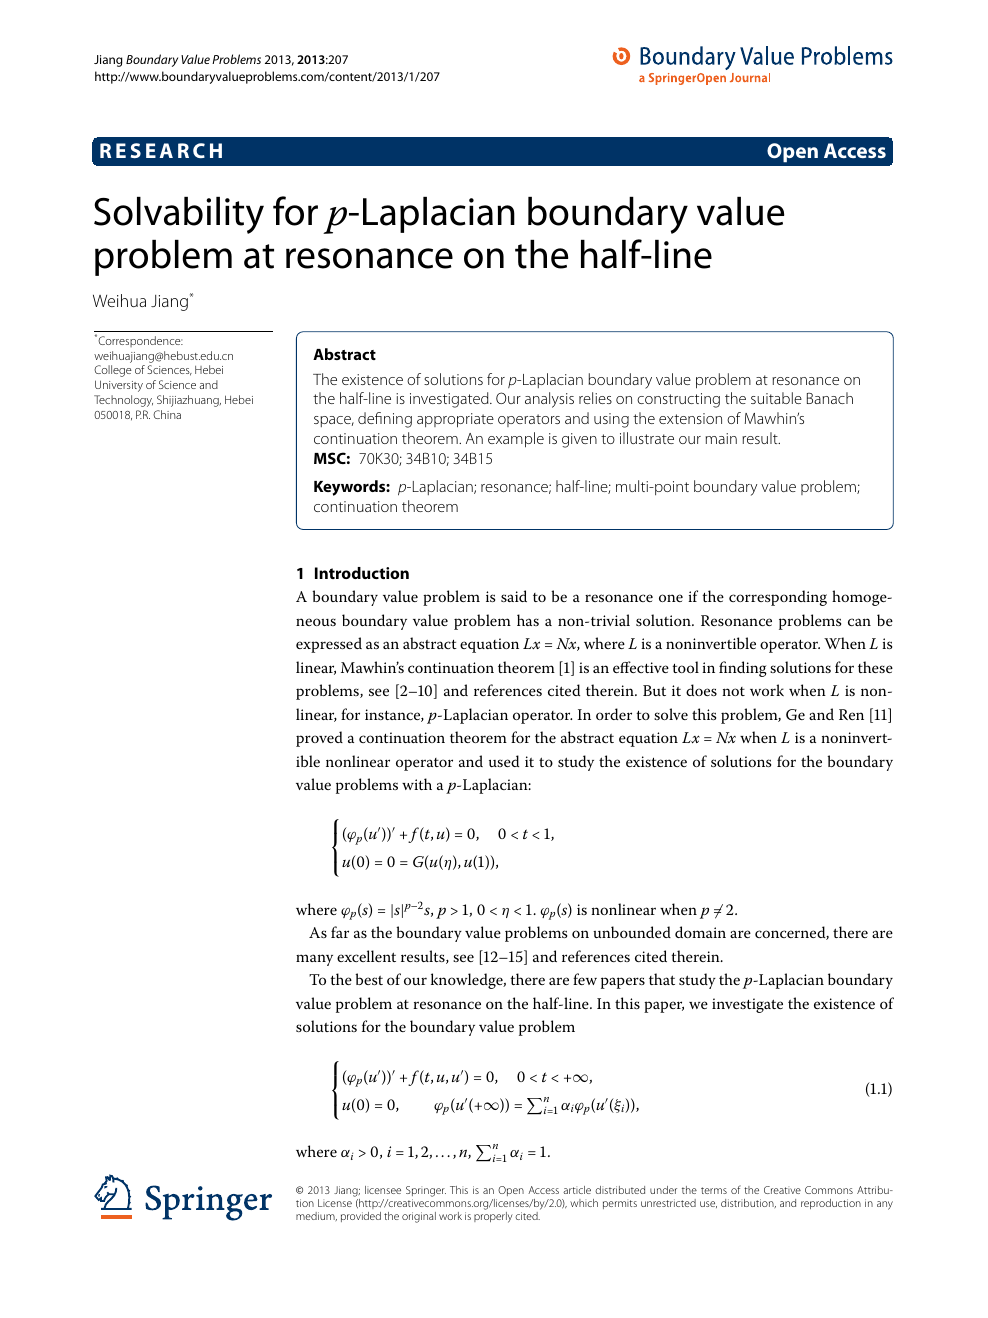 Solvability For P Laplacian Boundary Value Problem At Resonance On The Half Line Topic Of Research Paper In Mathematics Download Scholarly Article Pdf And Read For Free On Cyberleninka Open Science Hub